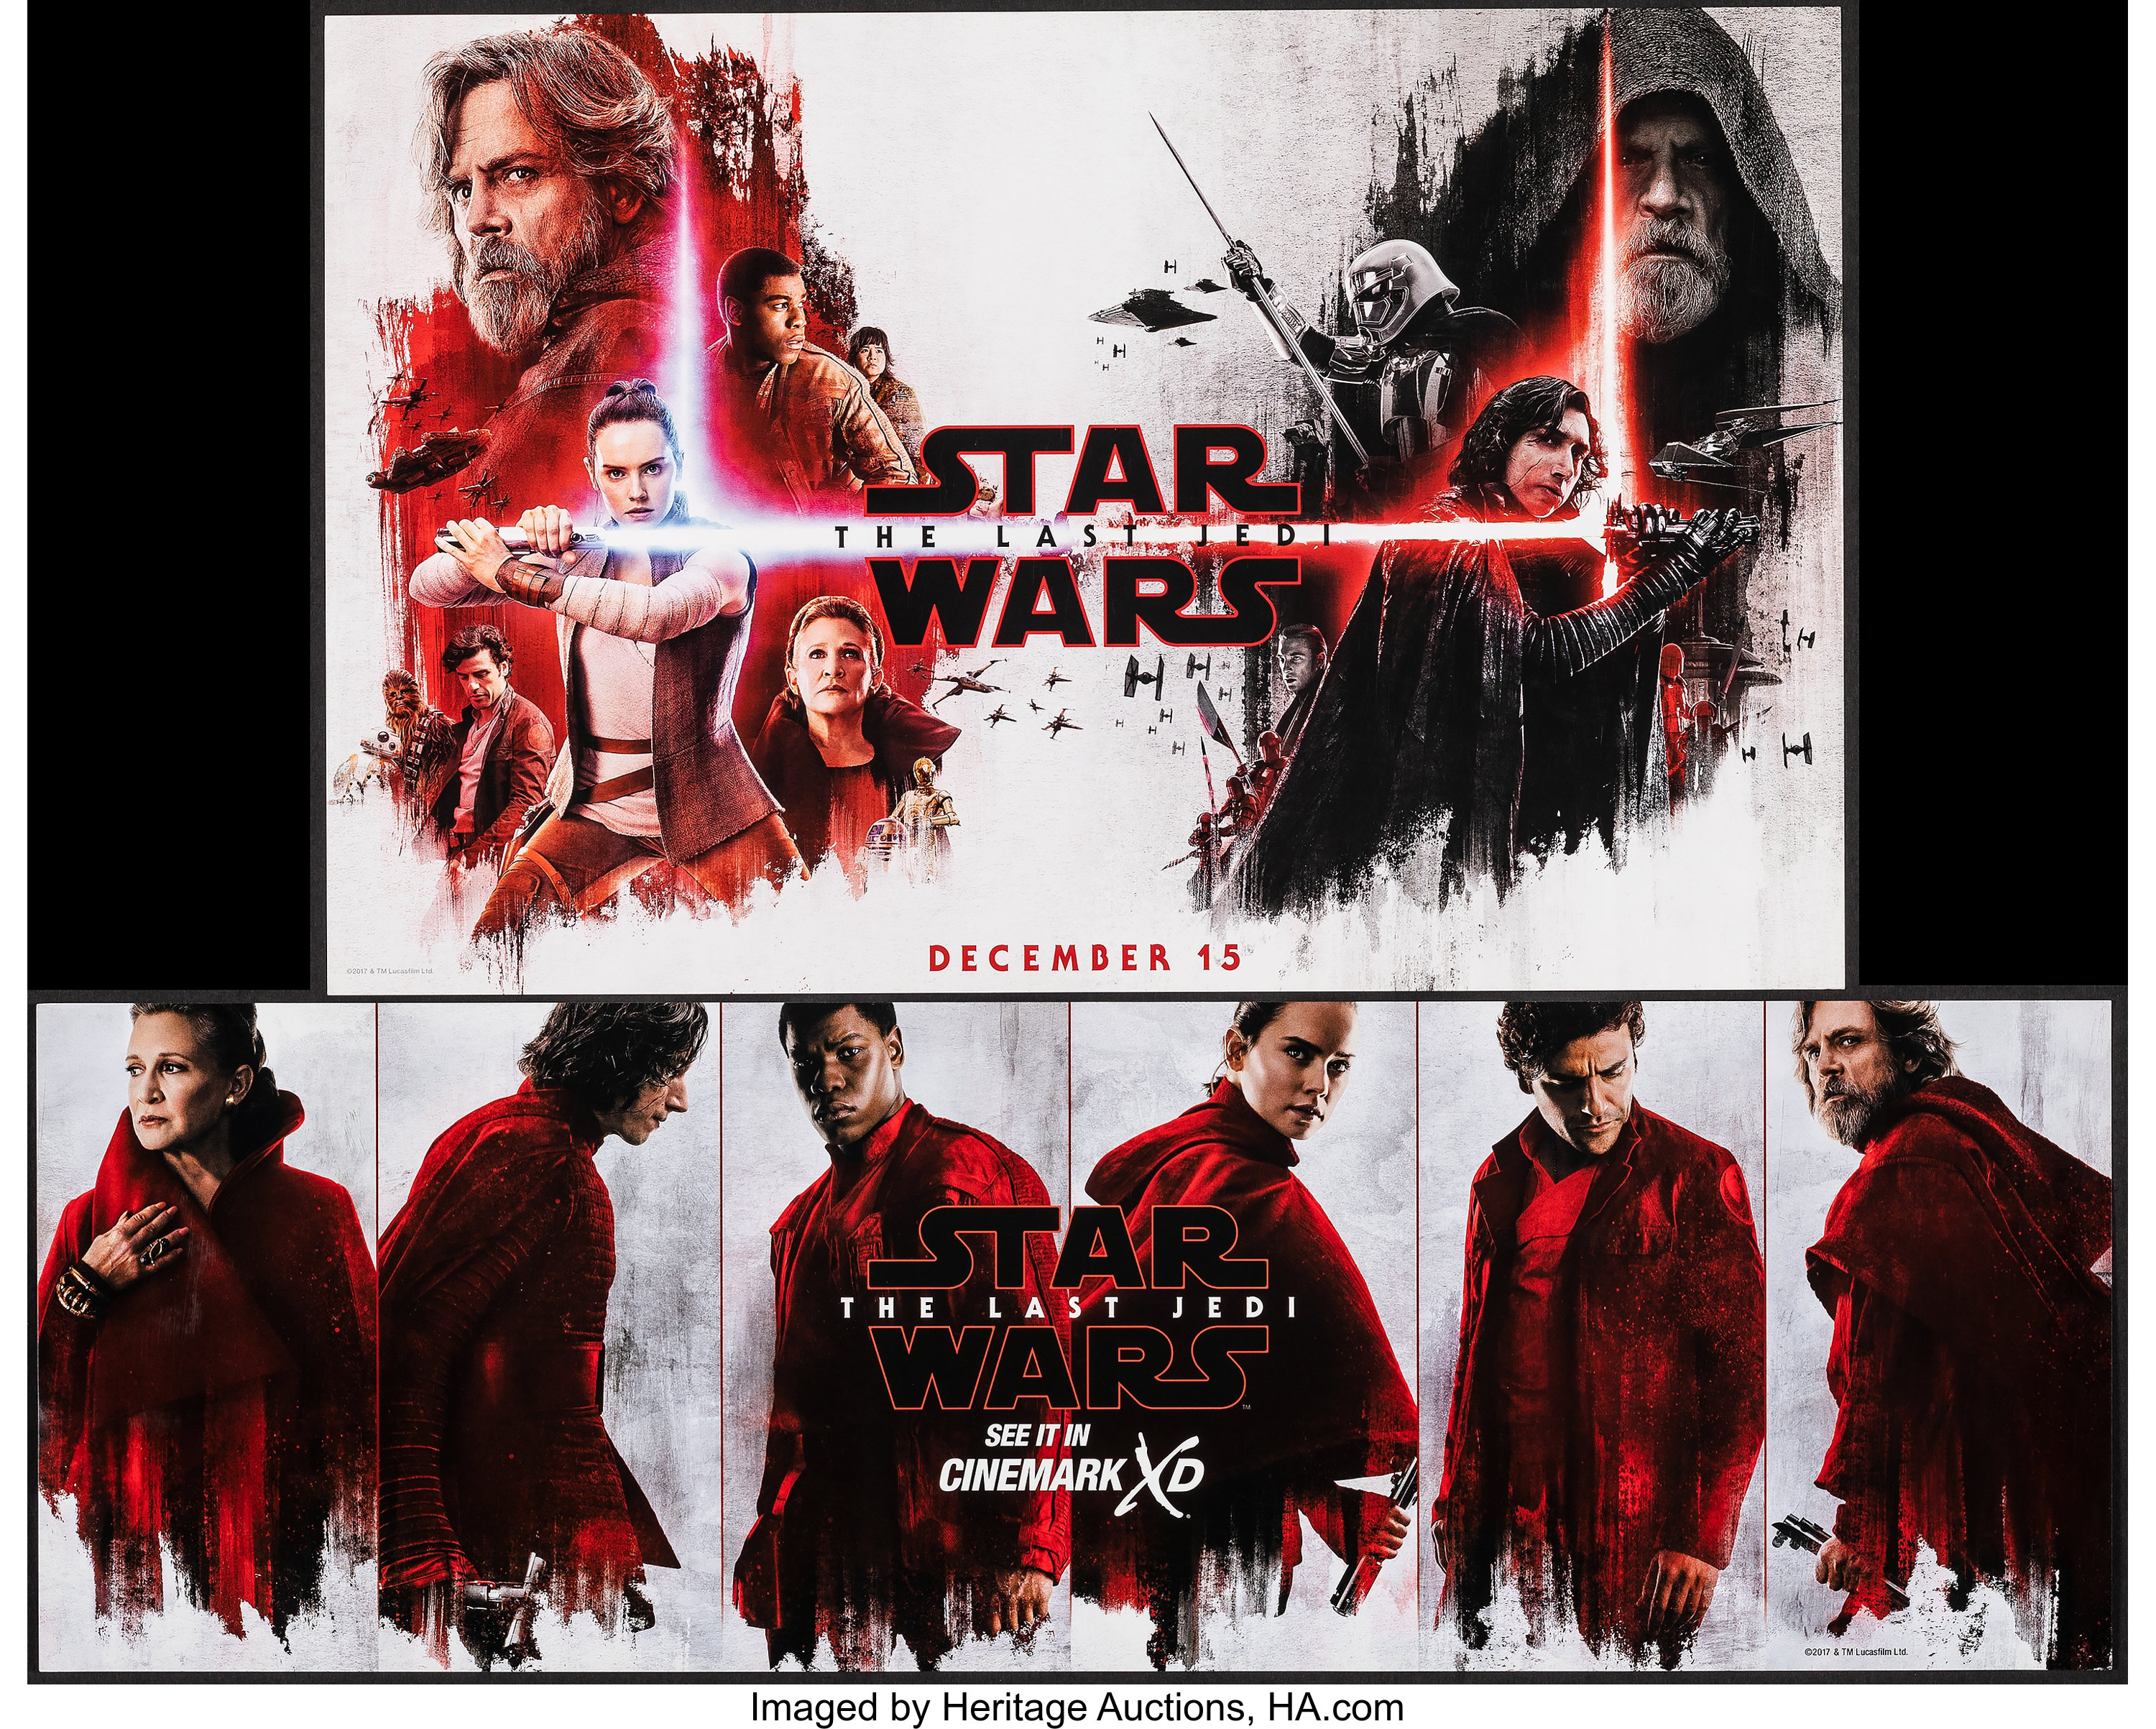 Star Wars: Episode VIII - The Last Jedi - Movie Poster (Character